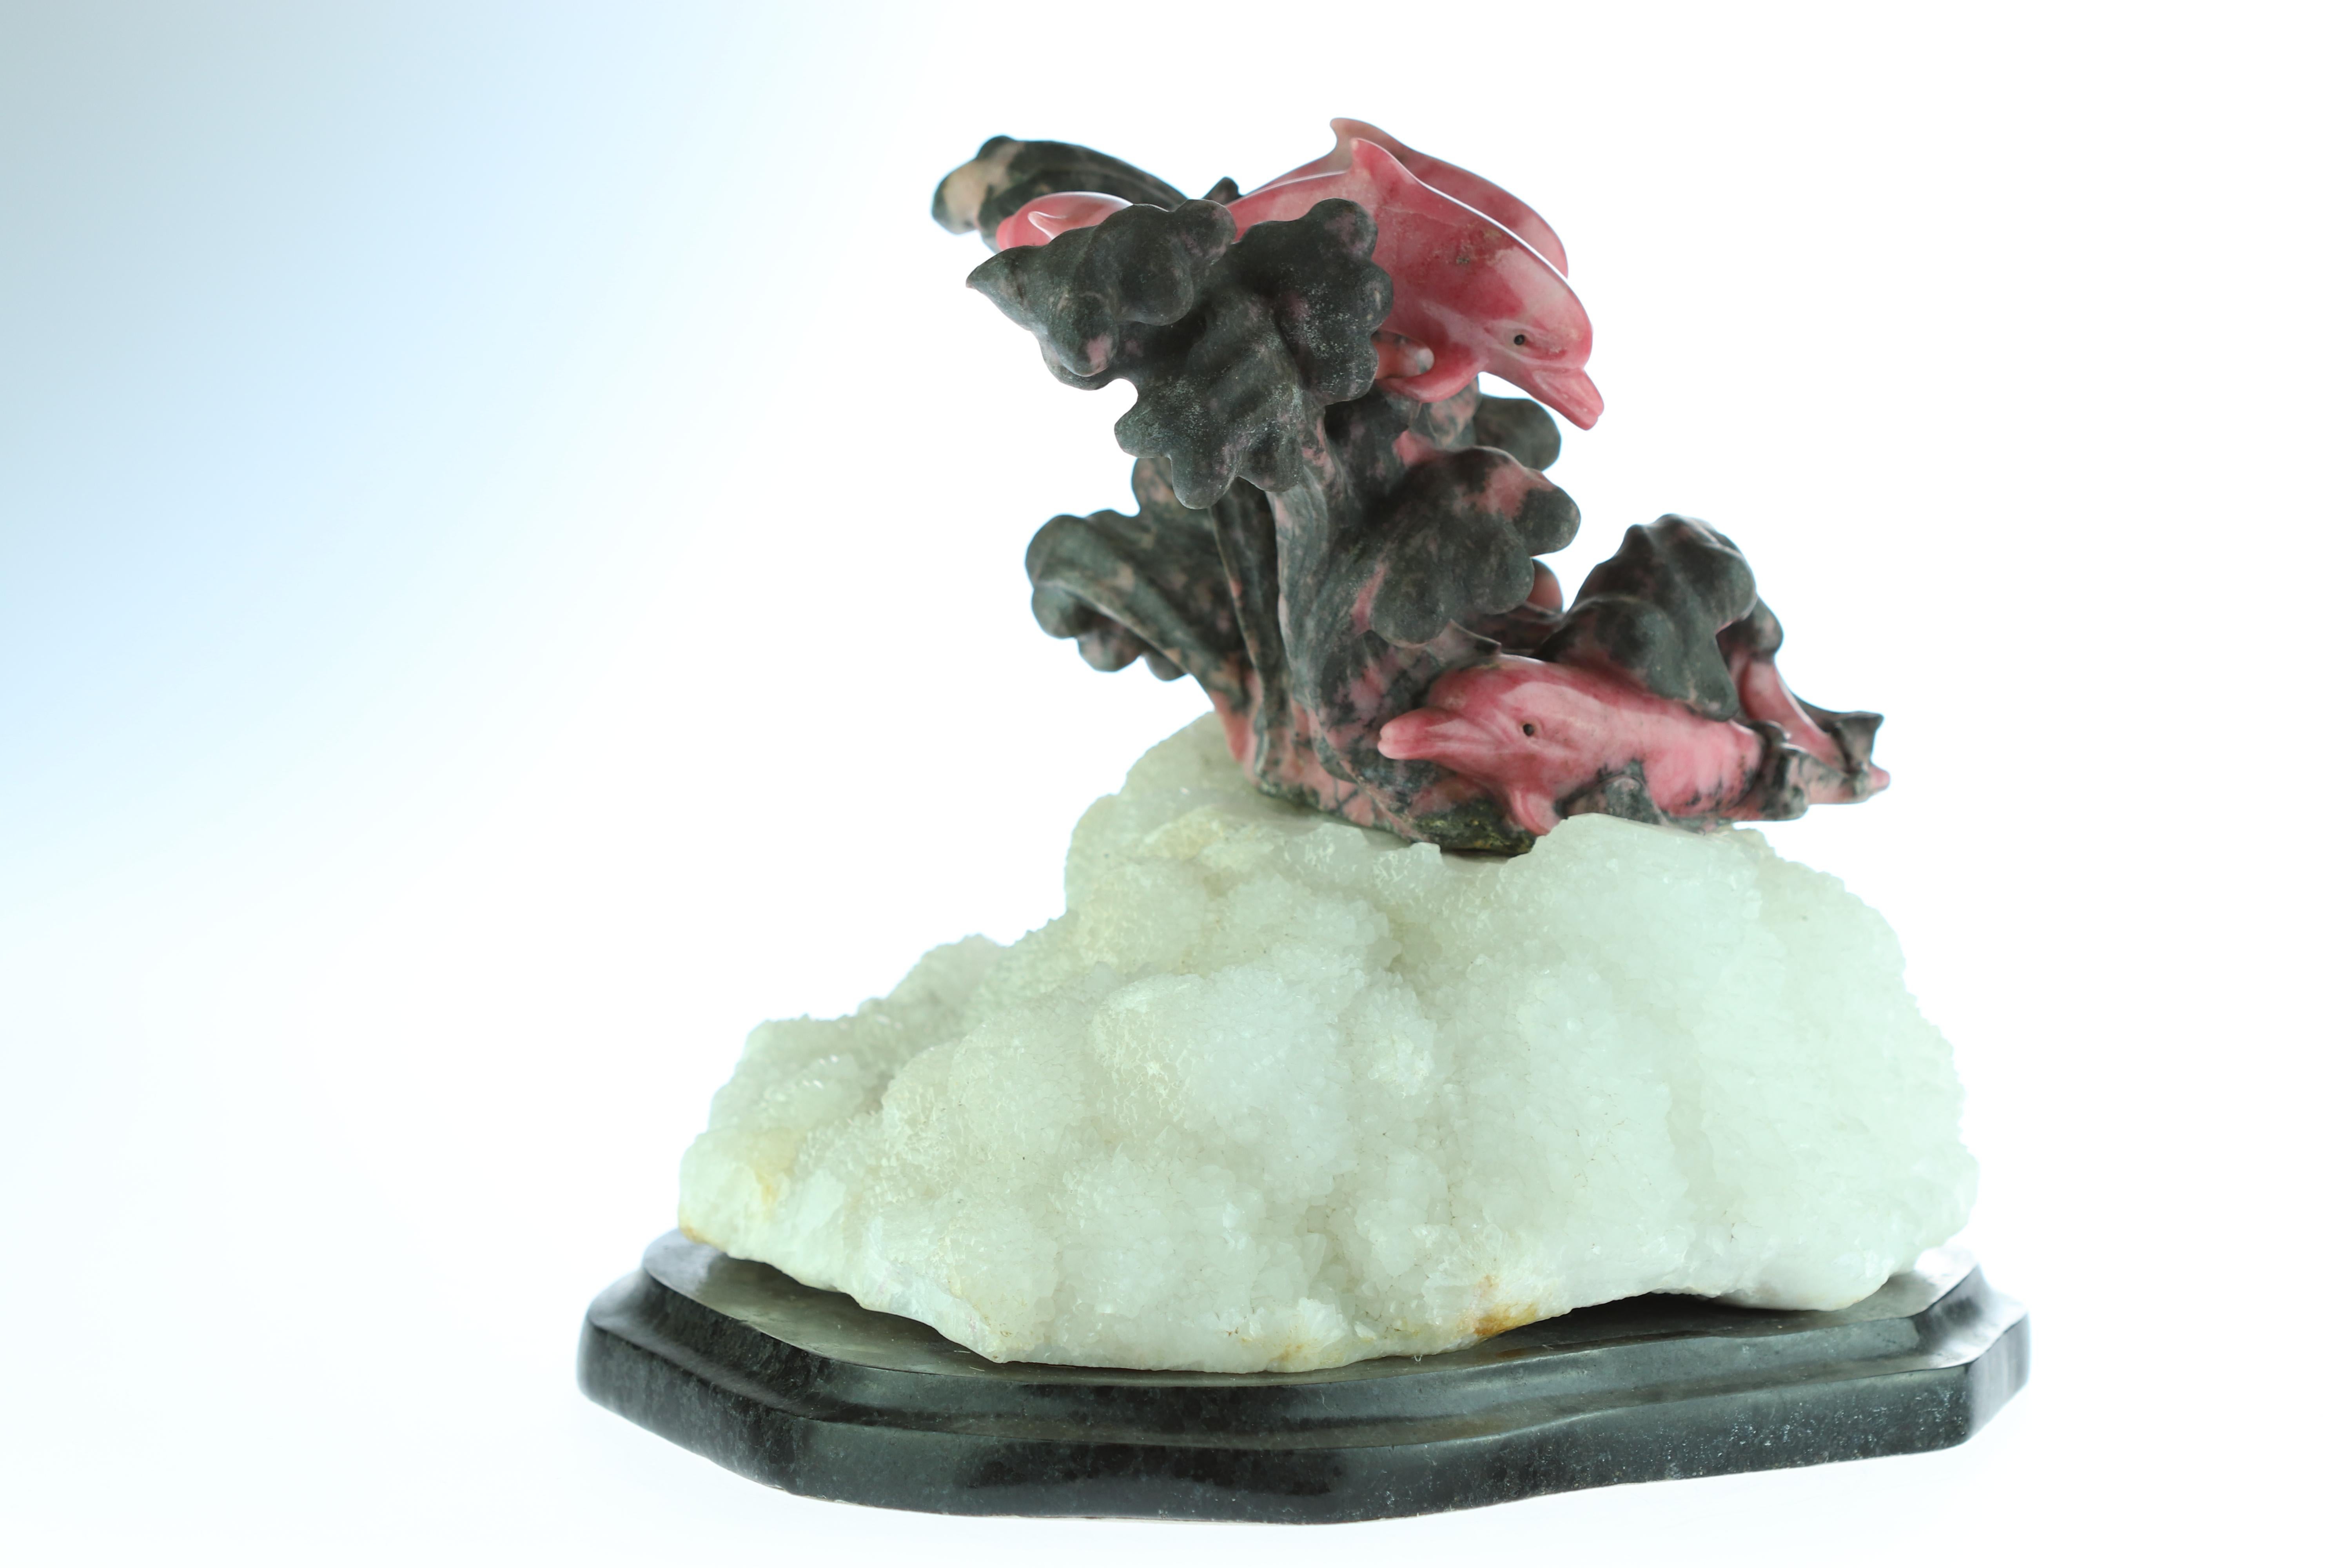 Hong Kong Natural Rhodochrosite Dolphins Figurine Carved Animal Artisanal Statue Sculpture For Sale